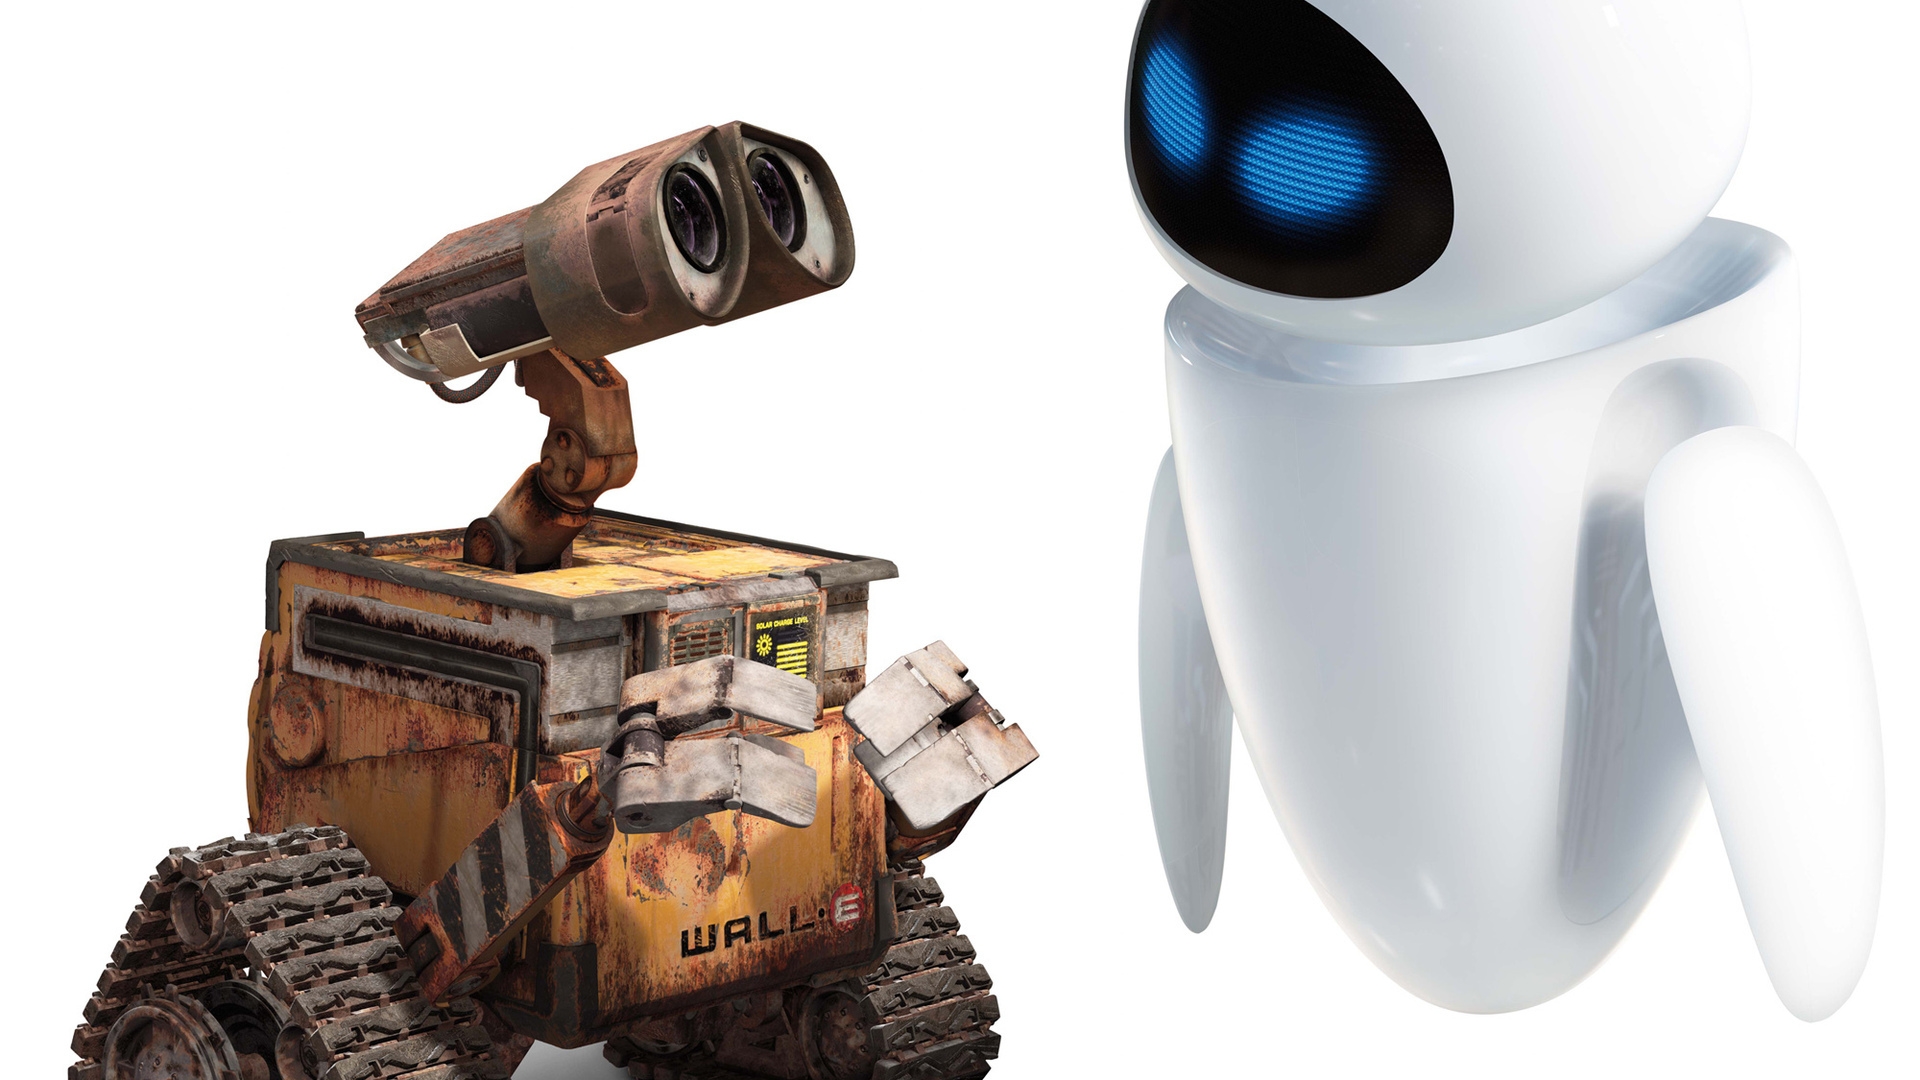 Walle Robots for 1920 x 1080 HDTV 1080p resolution